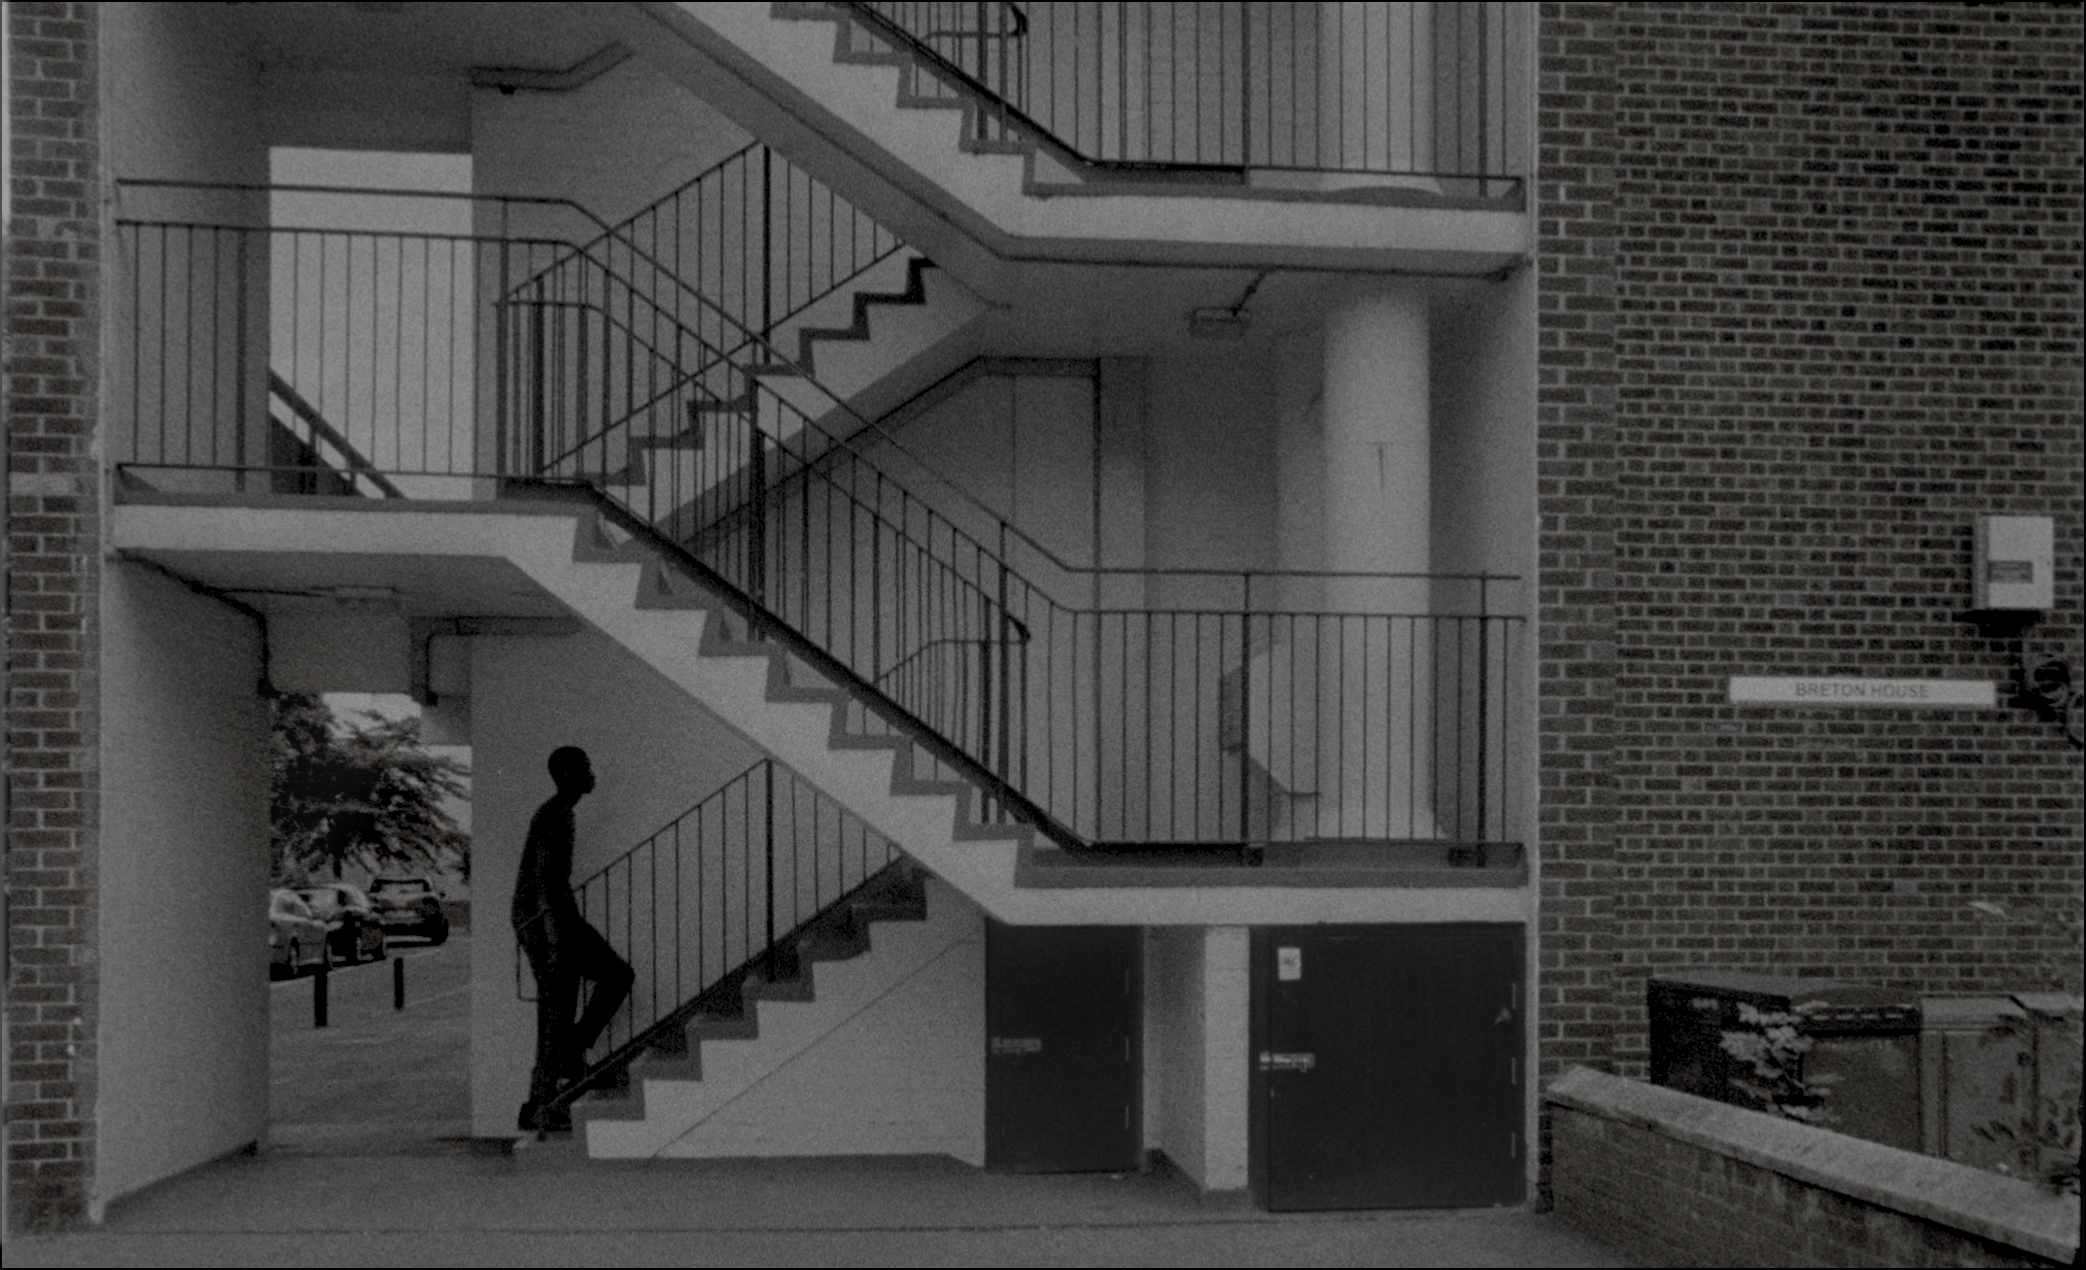 A black and white film still, in which a figure is starting to ascend a staircase in a south London tower block.